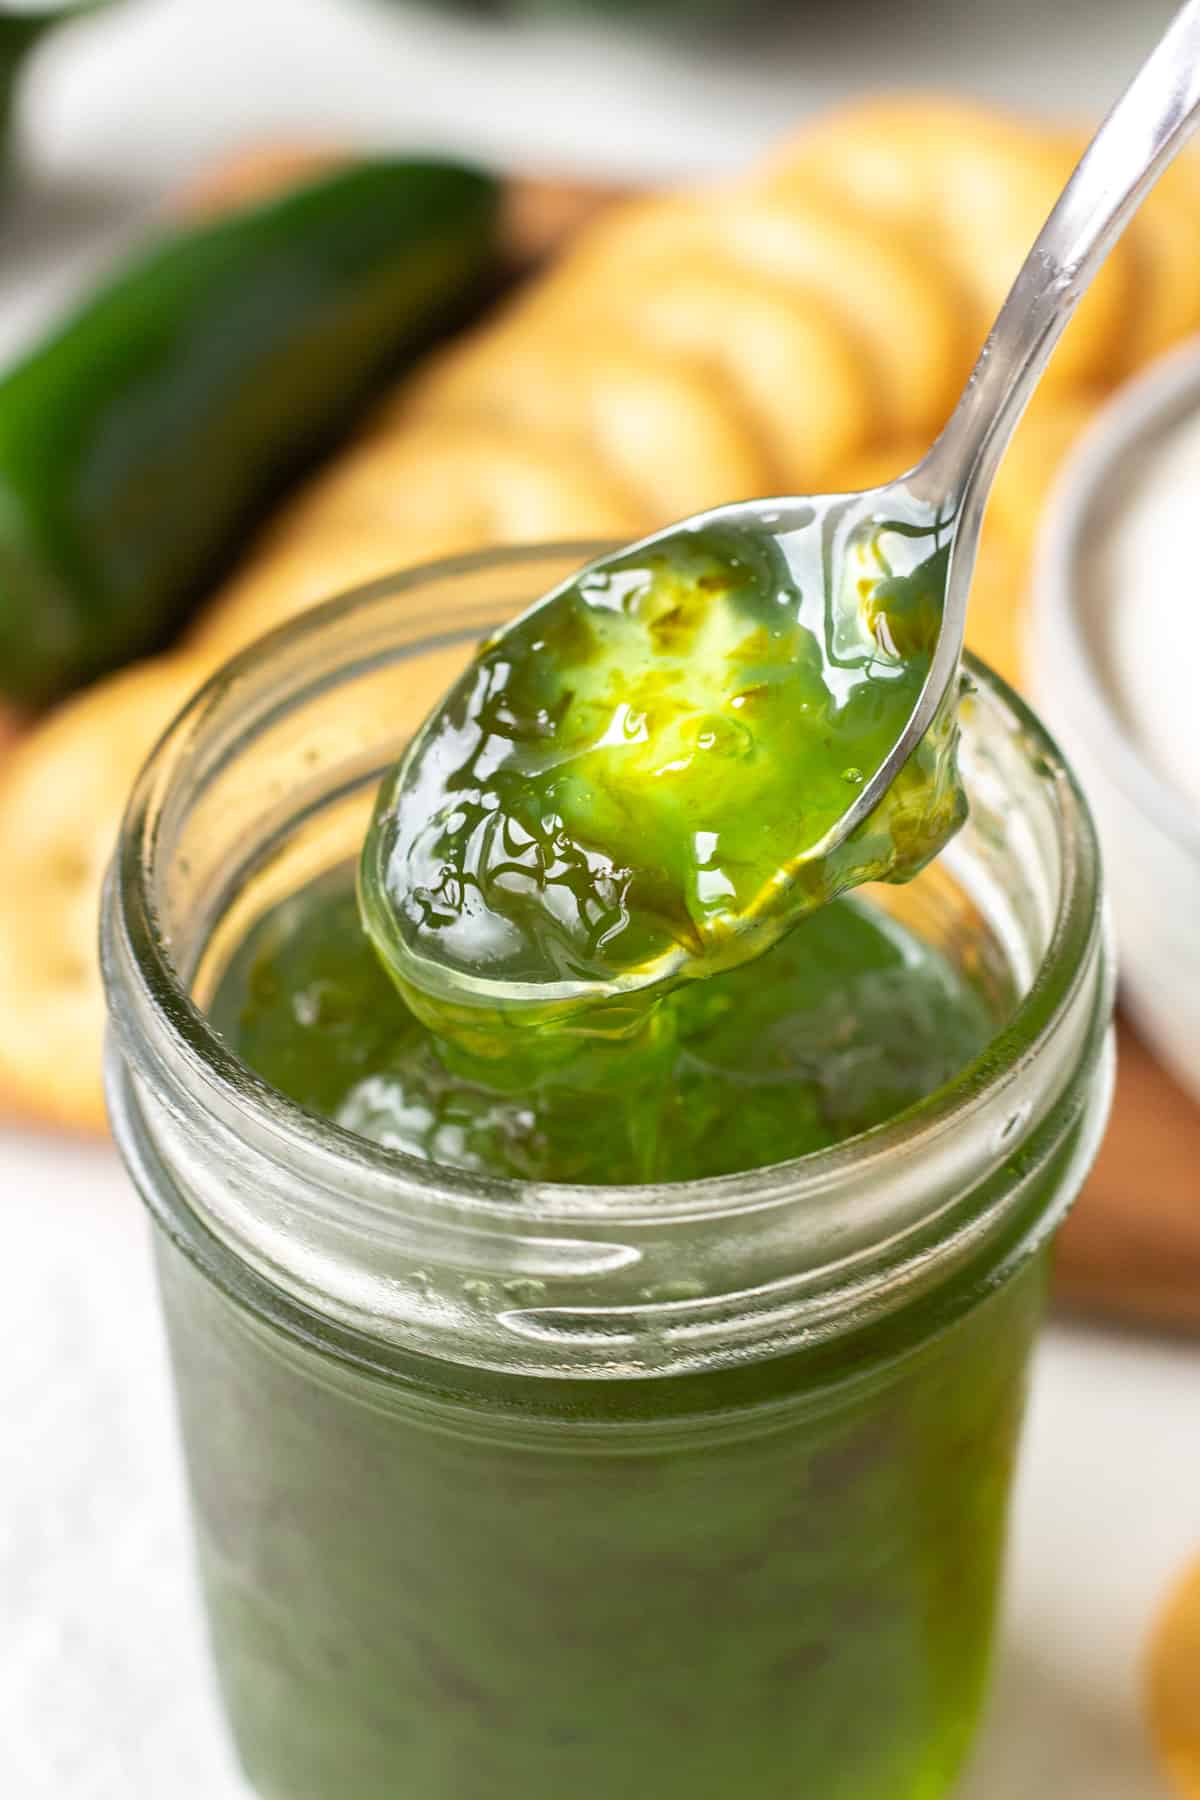 Spoon lifting green pepper jelly out of a mason jar surrounded by Ritz crackers.